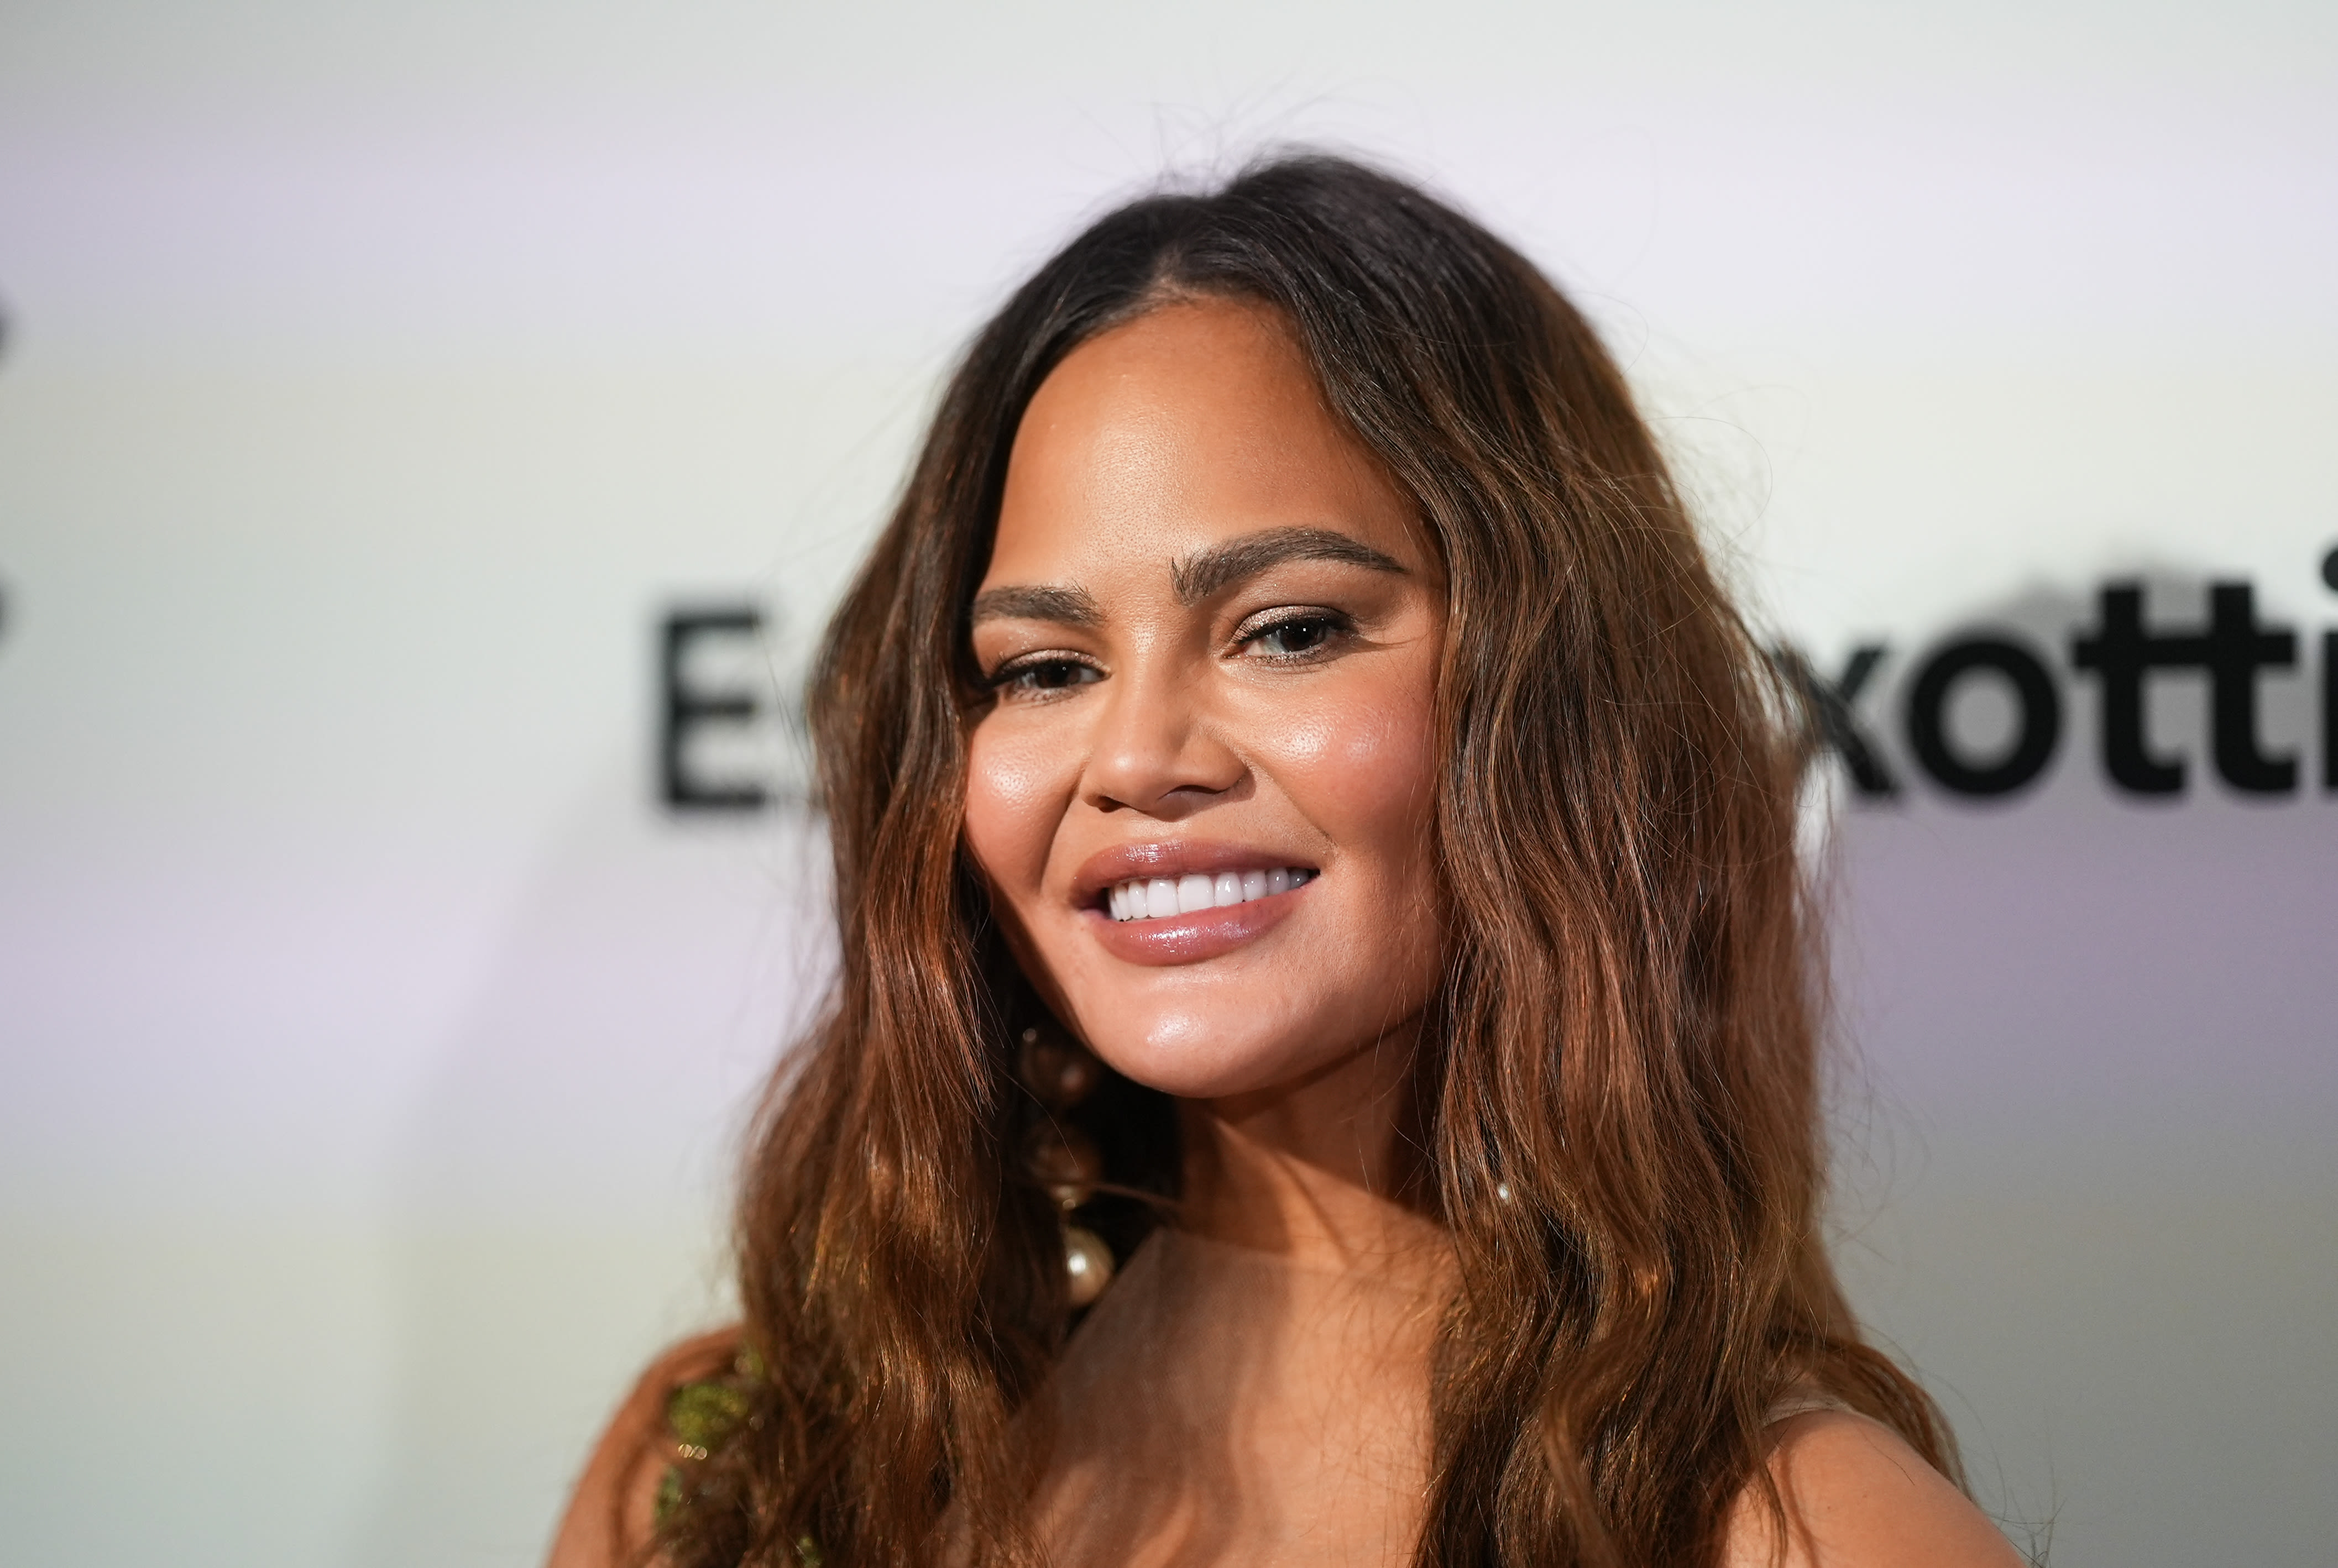 Chrissy Teigen Reveals She’s Lost the Ability To Do One Thing Since Having Baby Esti: ‘How Do I Get It Back?'